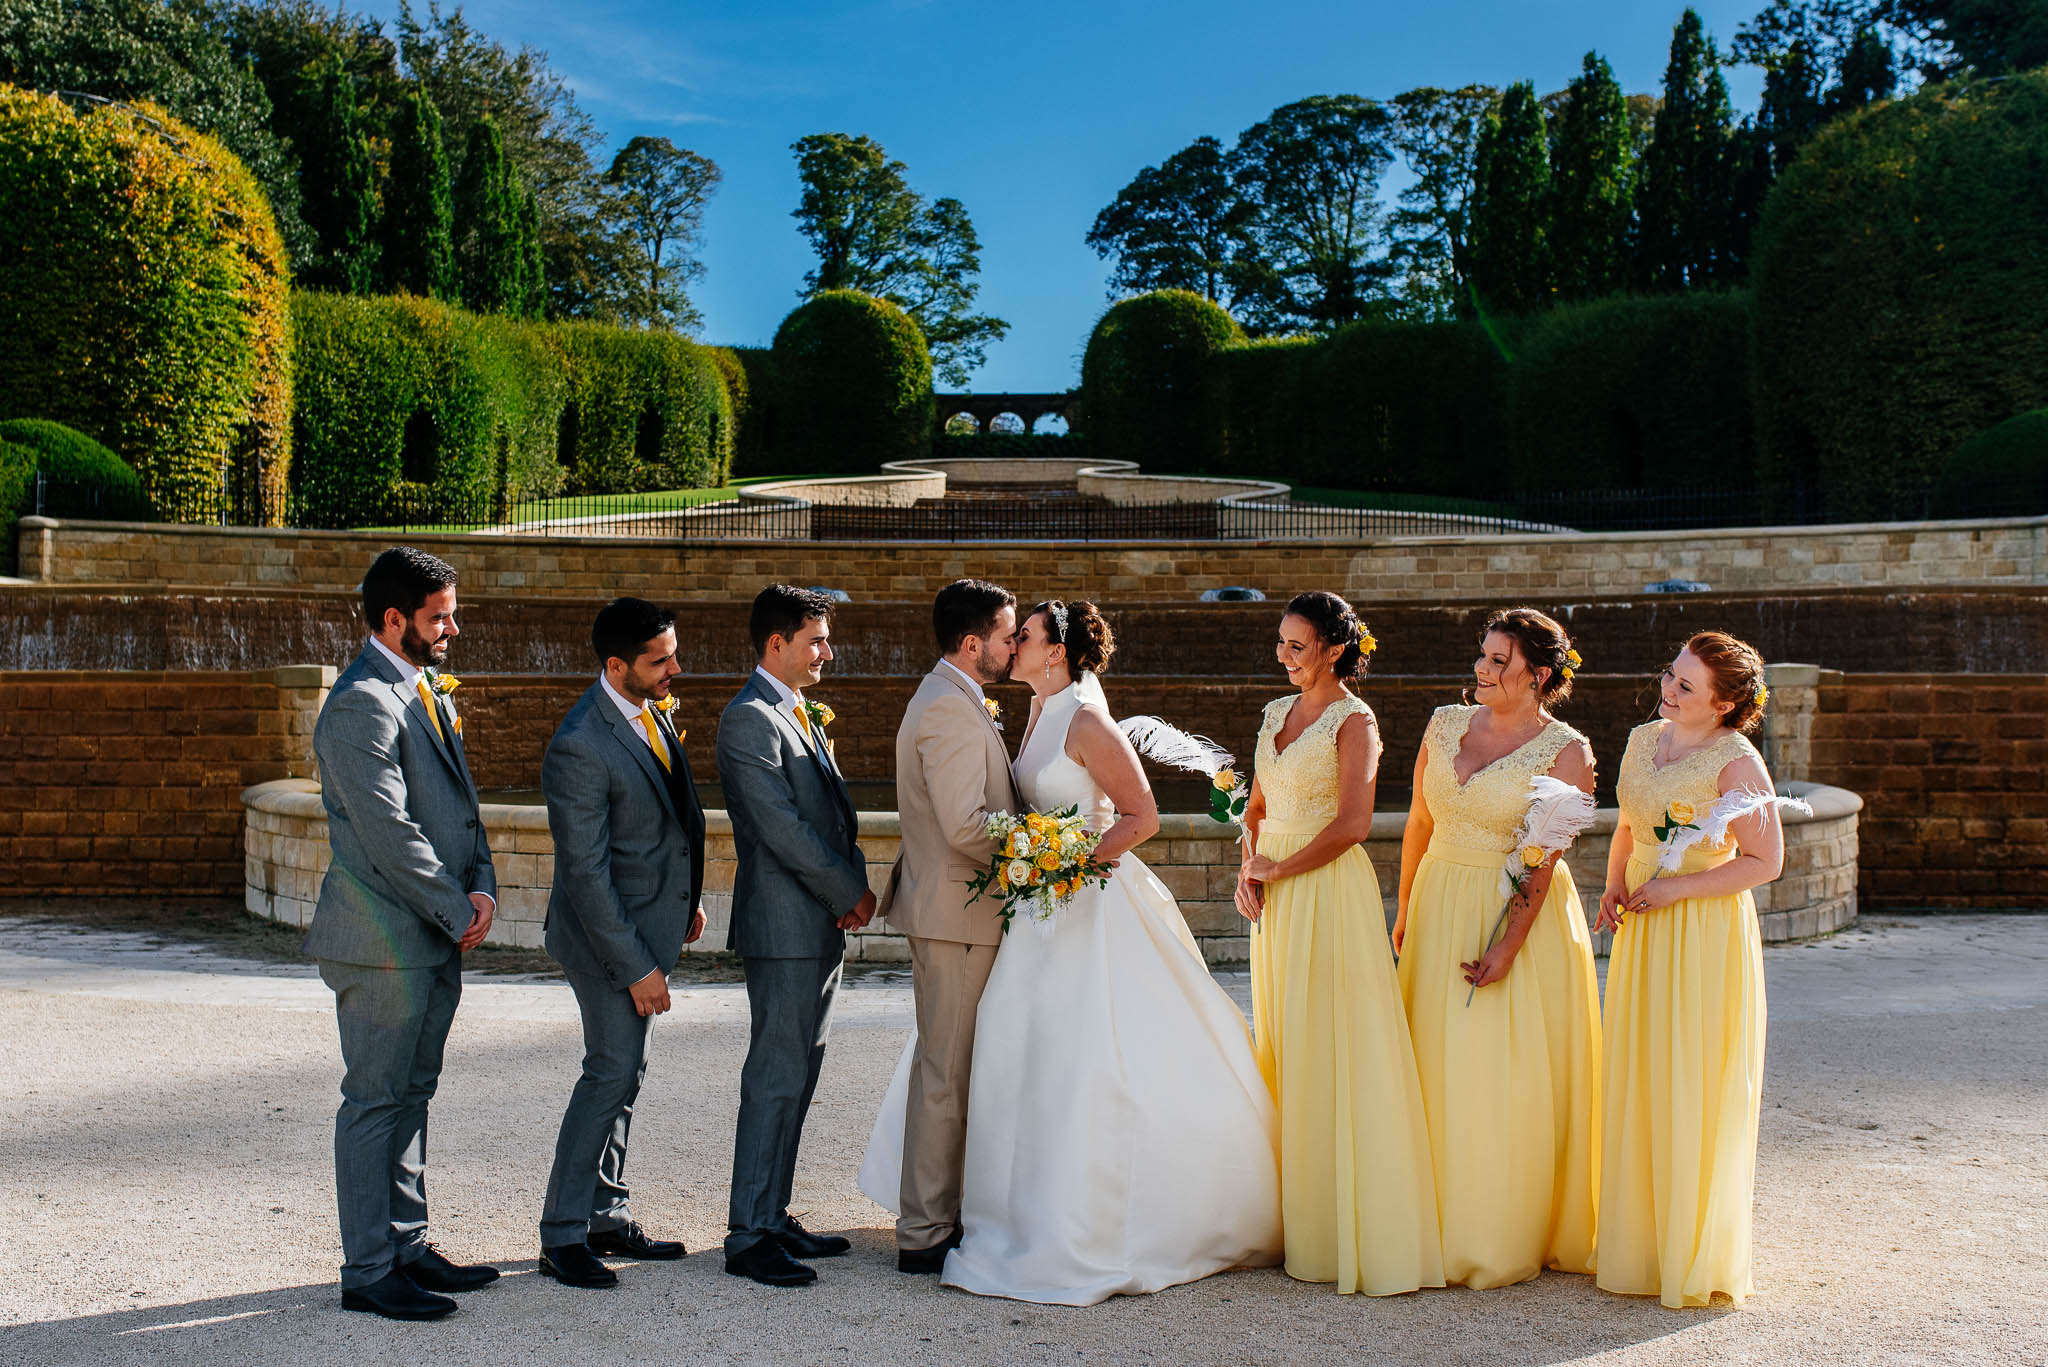 A group photograph with bride, groom, bridesmaids and groomsmen